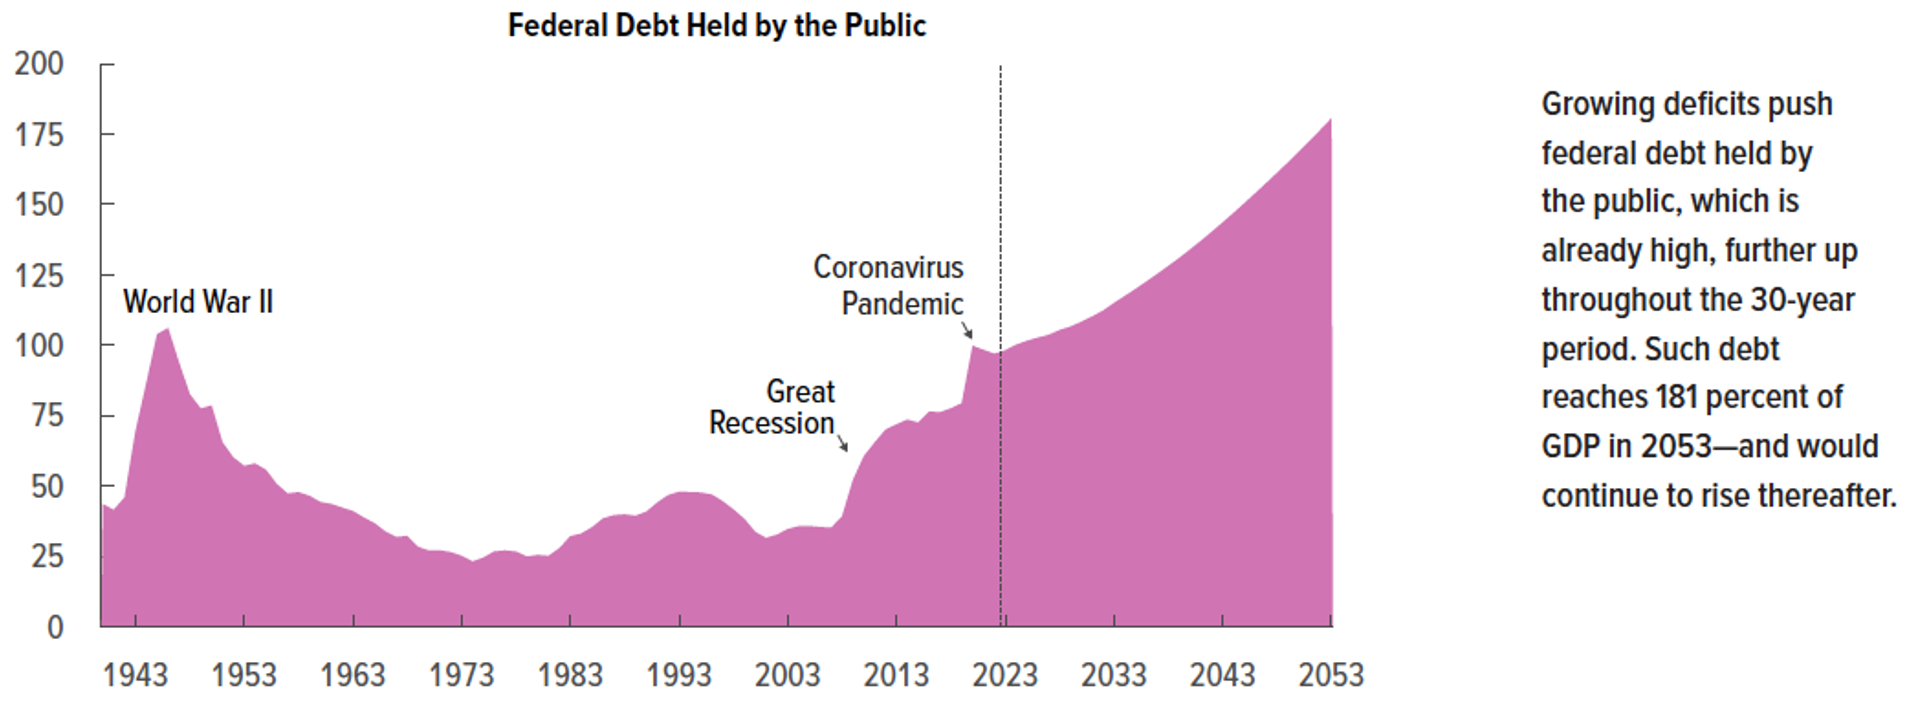 Line graph depicting federal debt held by the public as a percentage of gross domestic product from 2008 and projected to 2053. Graph is accompanied by a side blurb that states "Growing deficits push federal debt held by the public, which is already high, further up throughout the 30-year period. Such debt reaches 181 percent of GDP in 2053 - and would continue to rise thereafter.